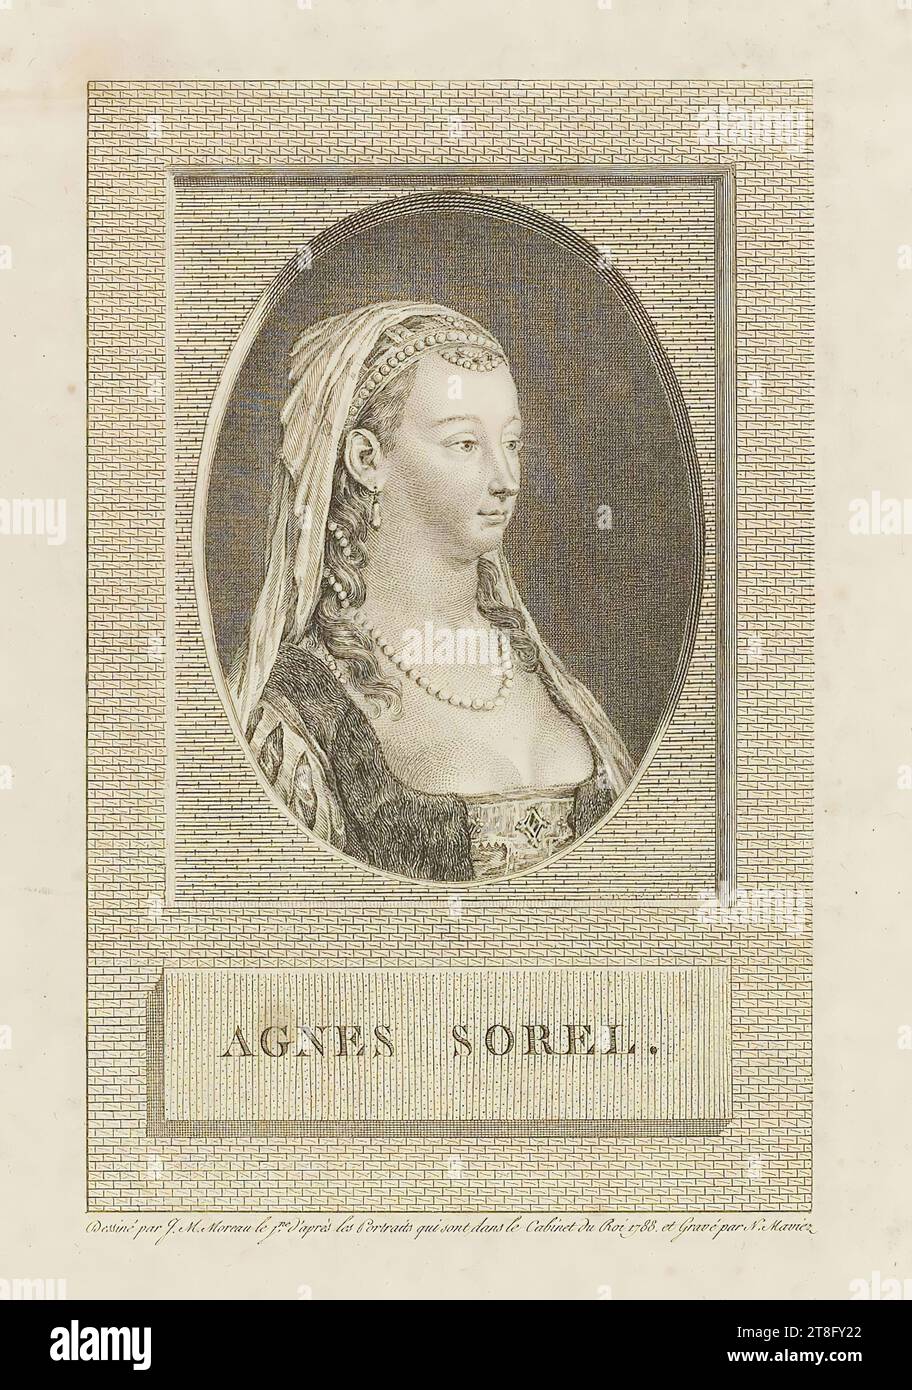 AGNES SOREL. Designed by J.M. Moreau le jne. after the Portraits which are in the Cabinet of the King 1788, and engraved by N. Maviez Stock Photo